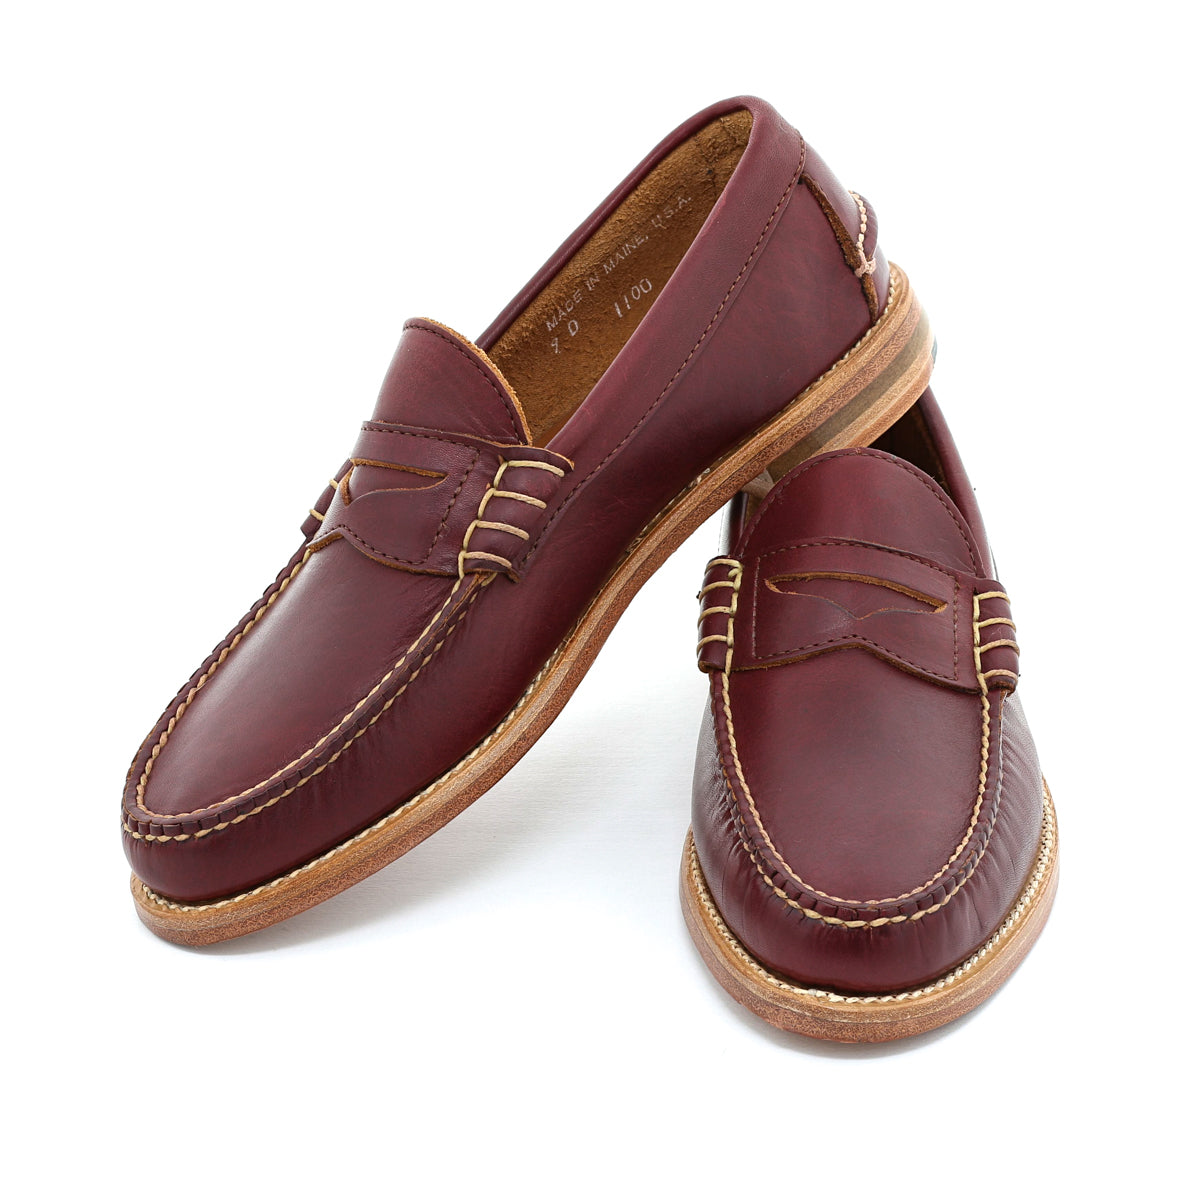 Penny Loafers - Eggplant Honcho | Rancourt & Co. | Men's Boots and Shoes